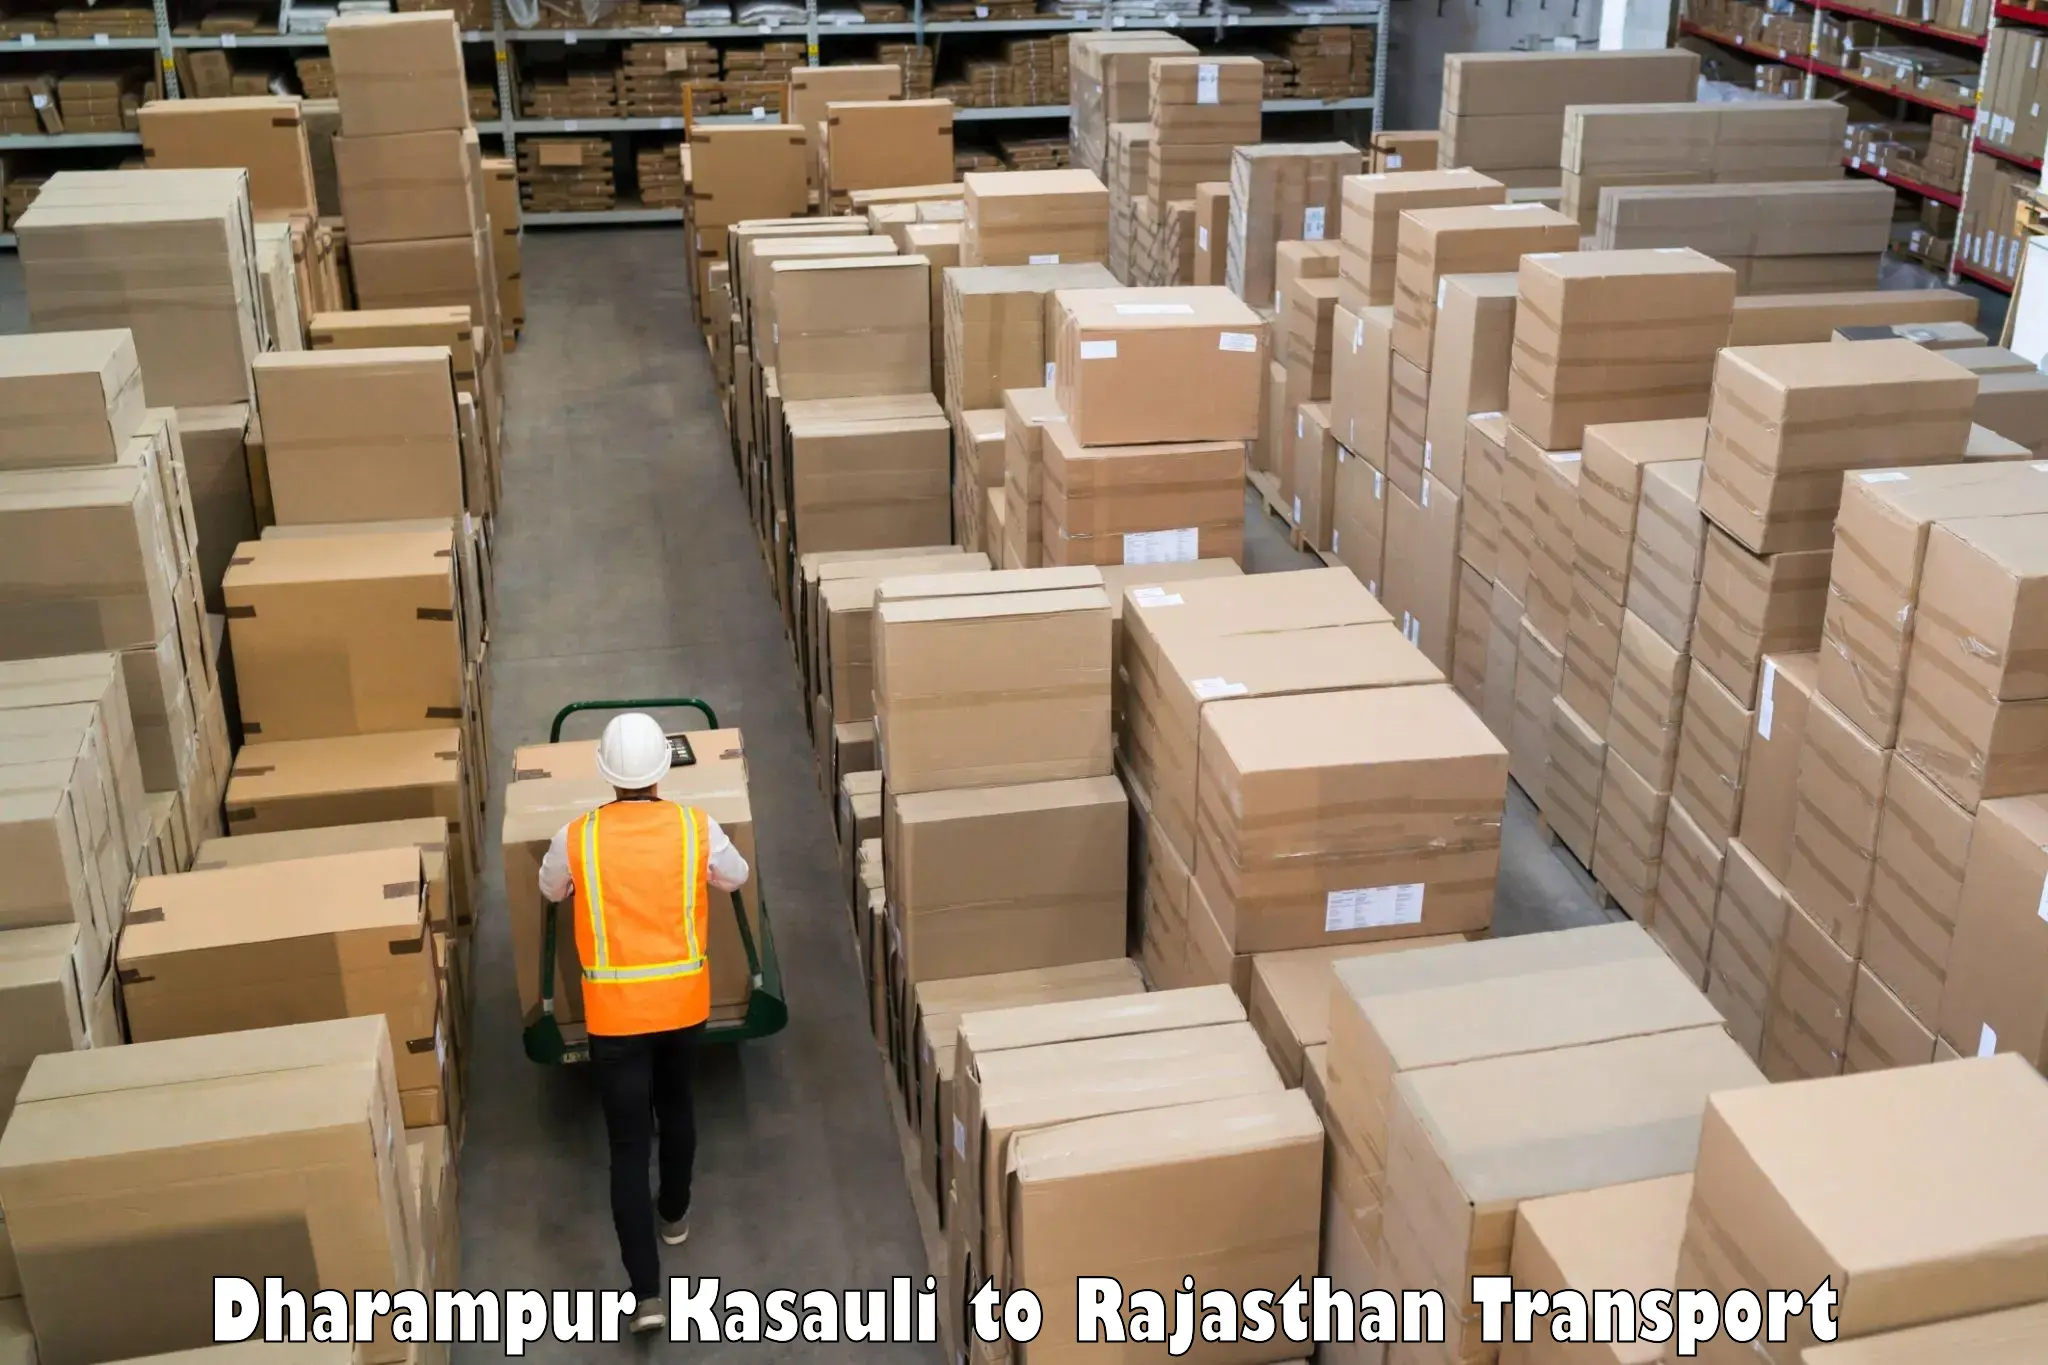 Goods delivery service Dharampur Kasauli to Karauli